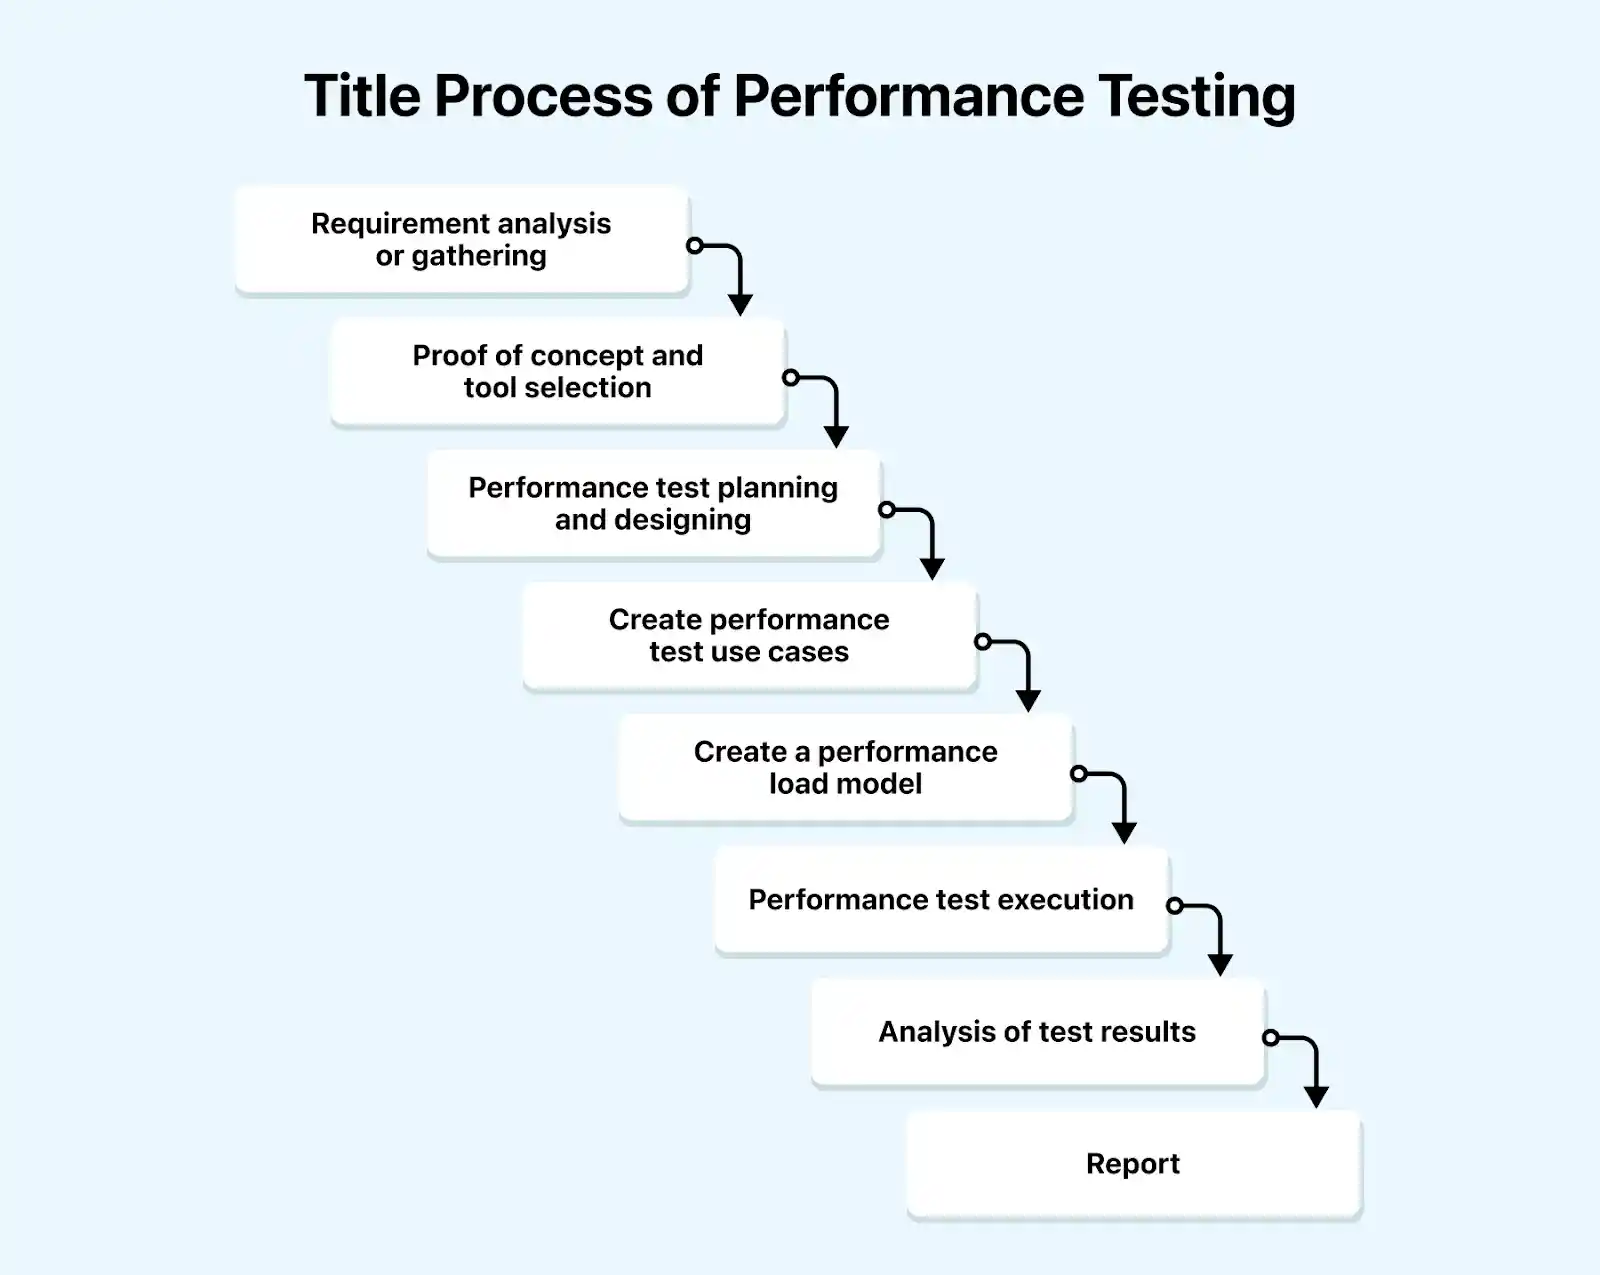 Process of Performance Testing